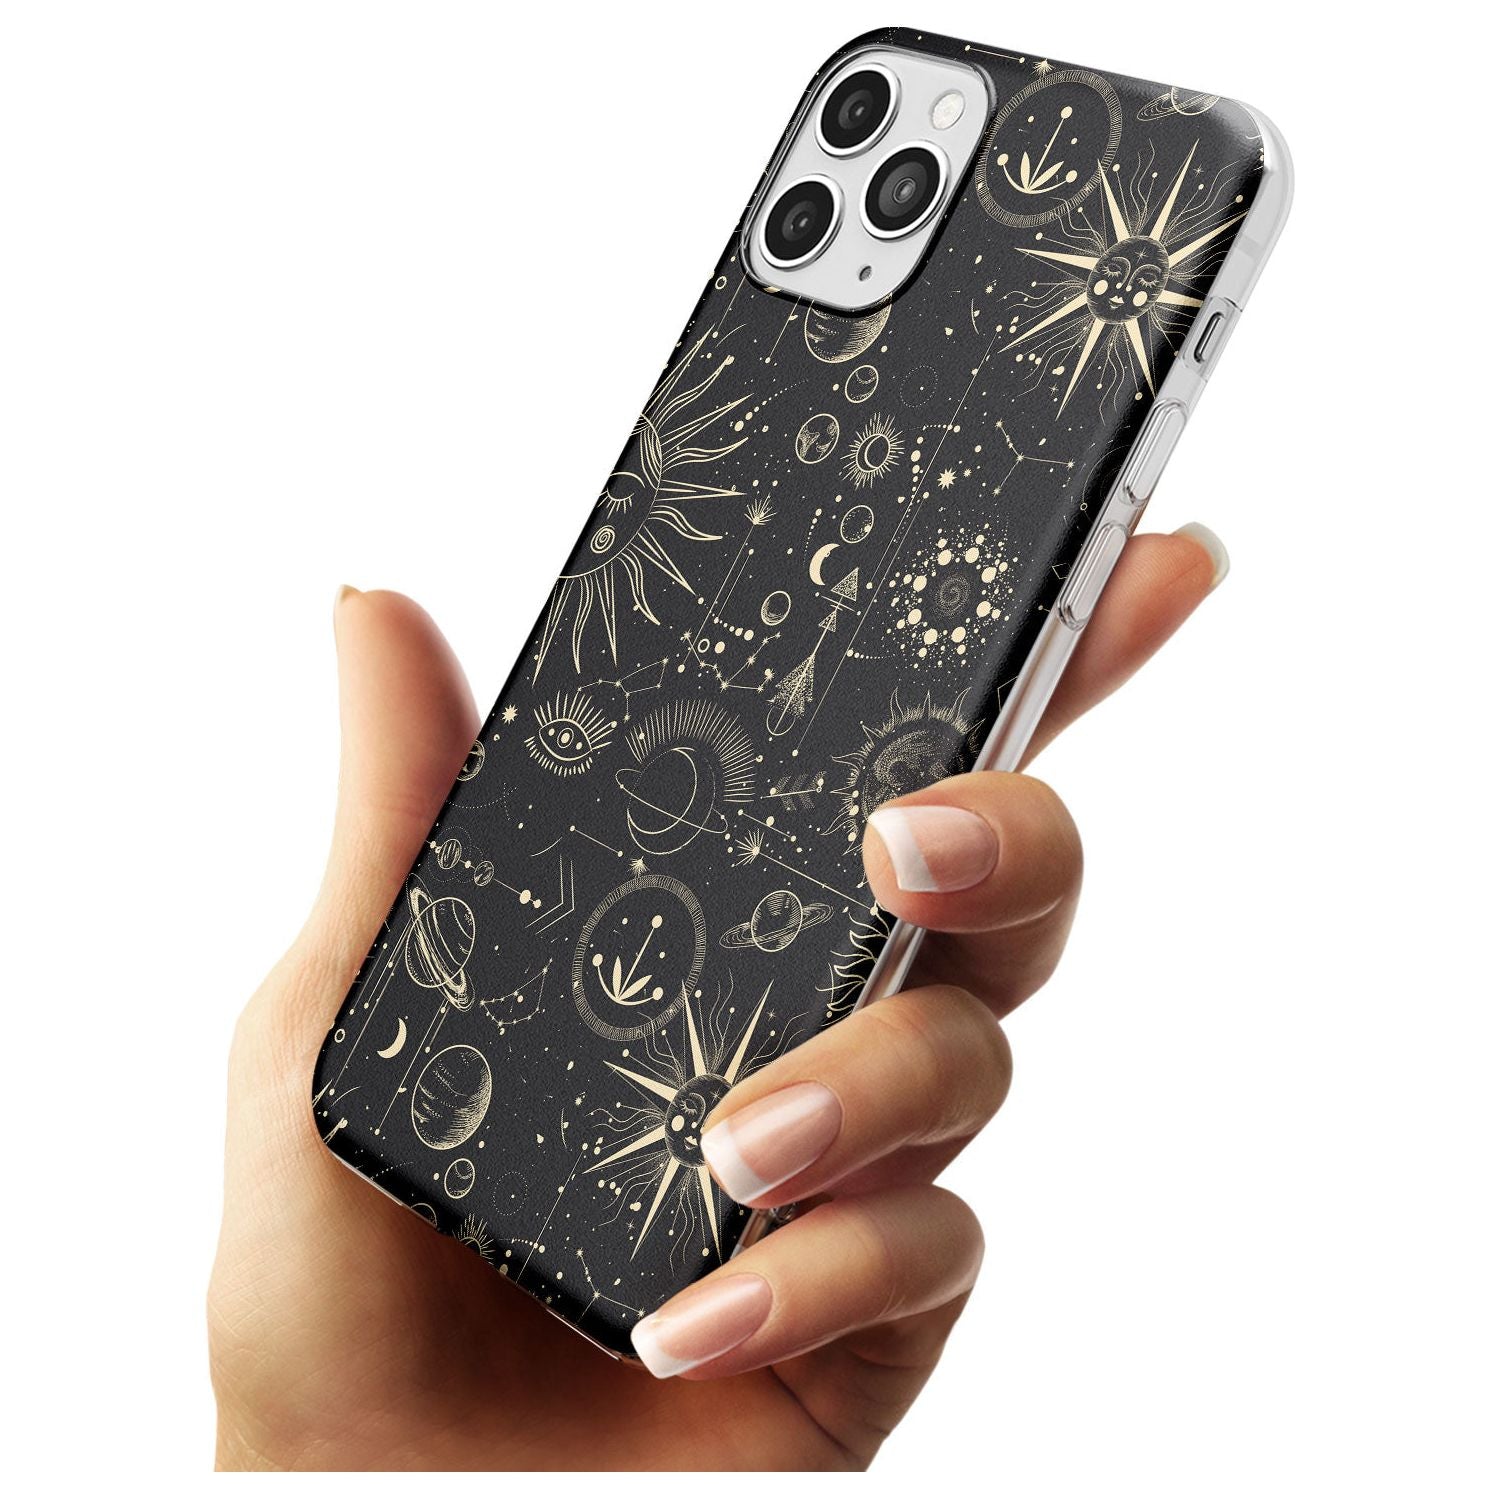 Suns & Planets Black Impact Phone Case for iPhone 11 Pro Max